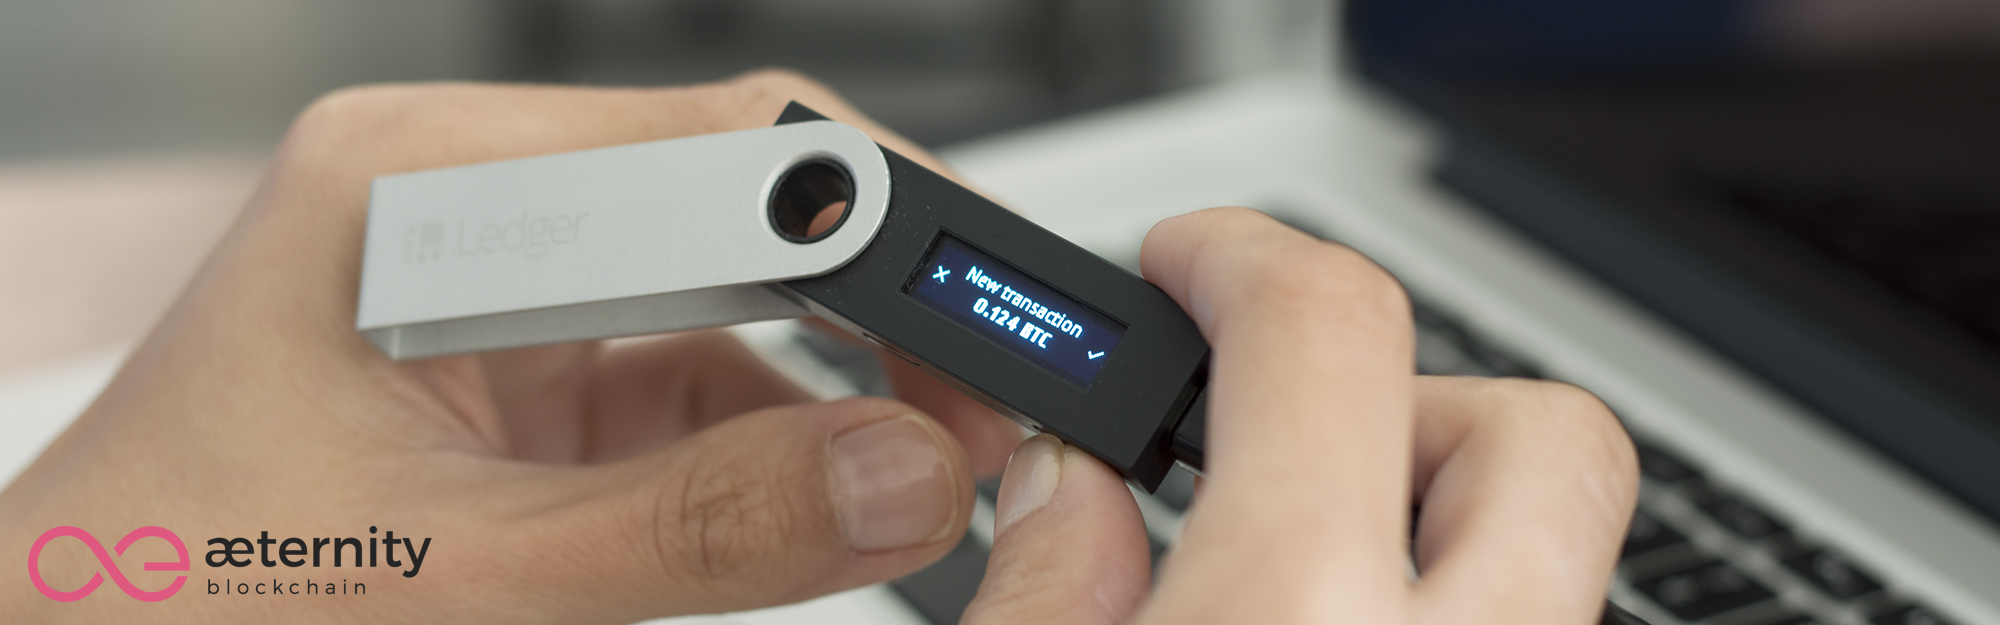 Claiming Your Ledger Nano S With A Hardware Wallet Device - 